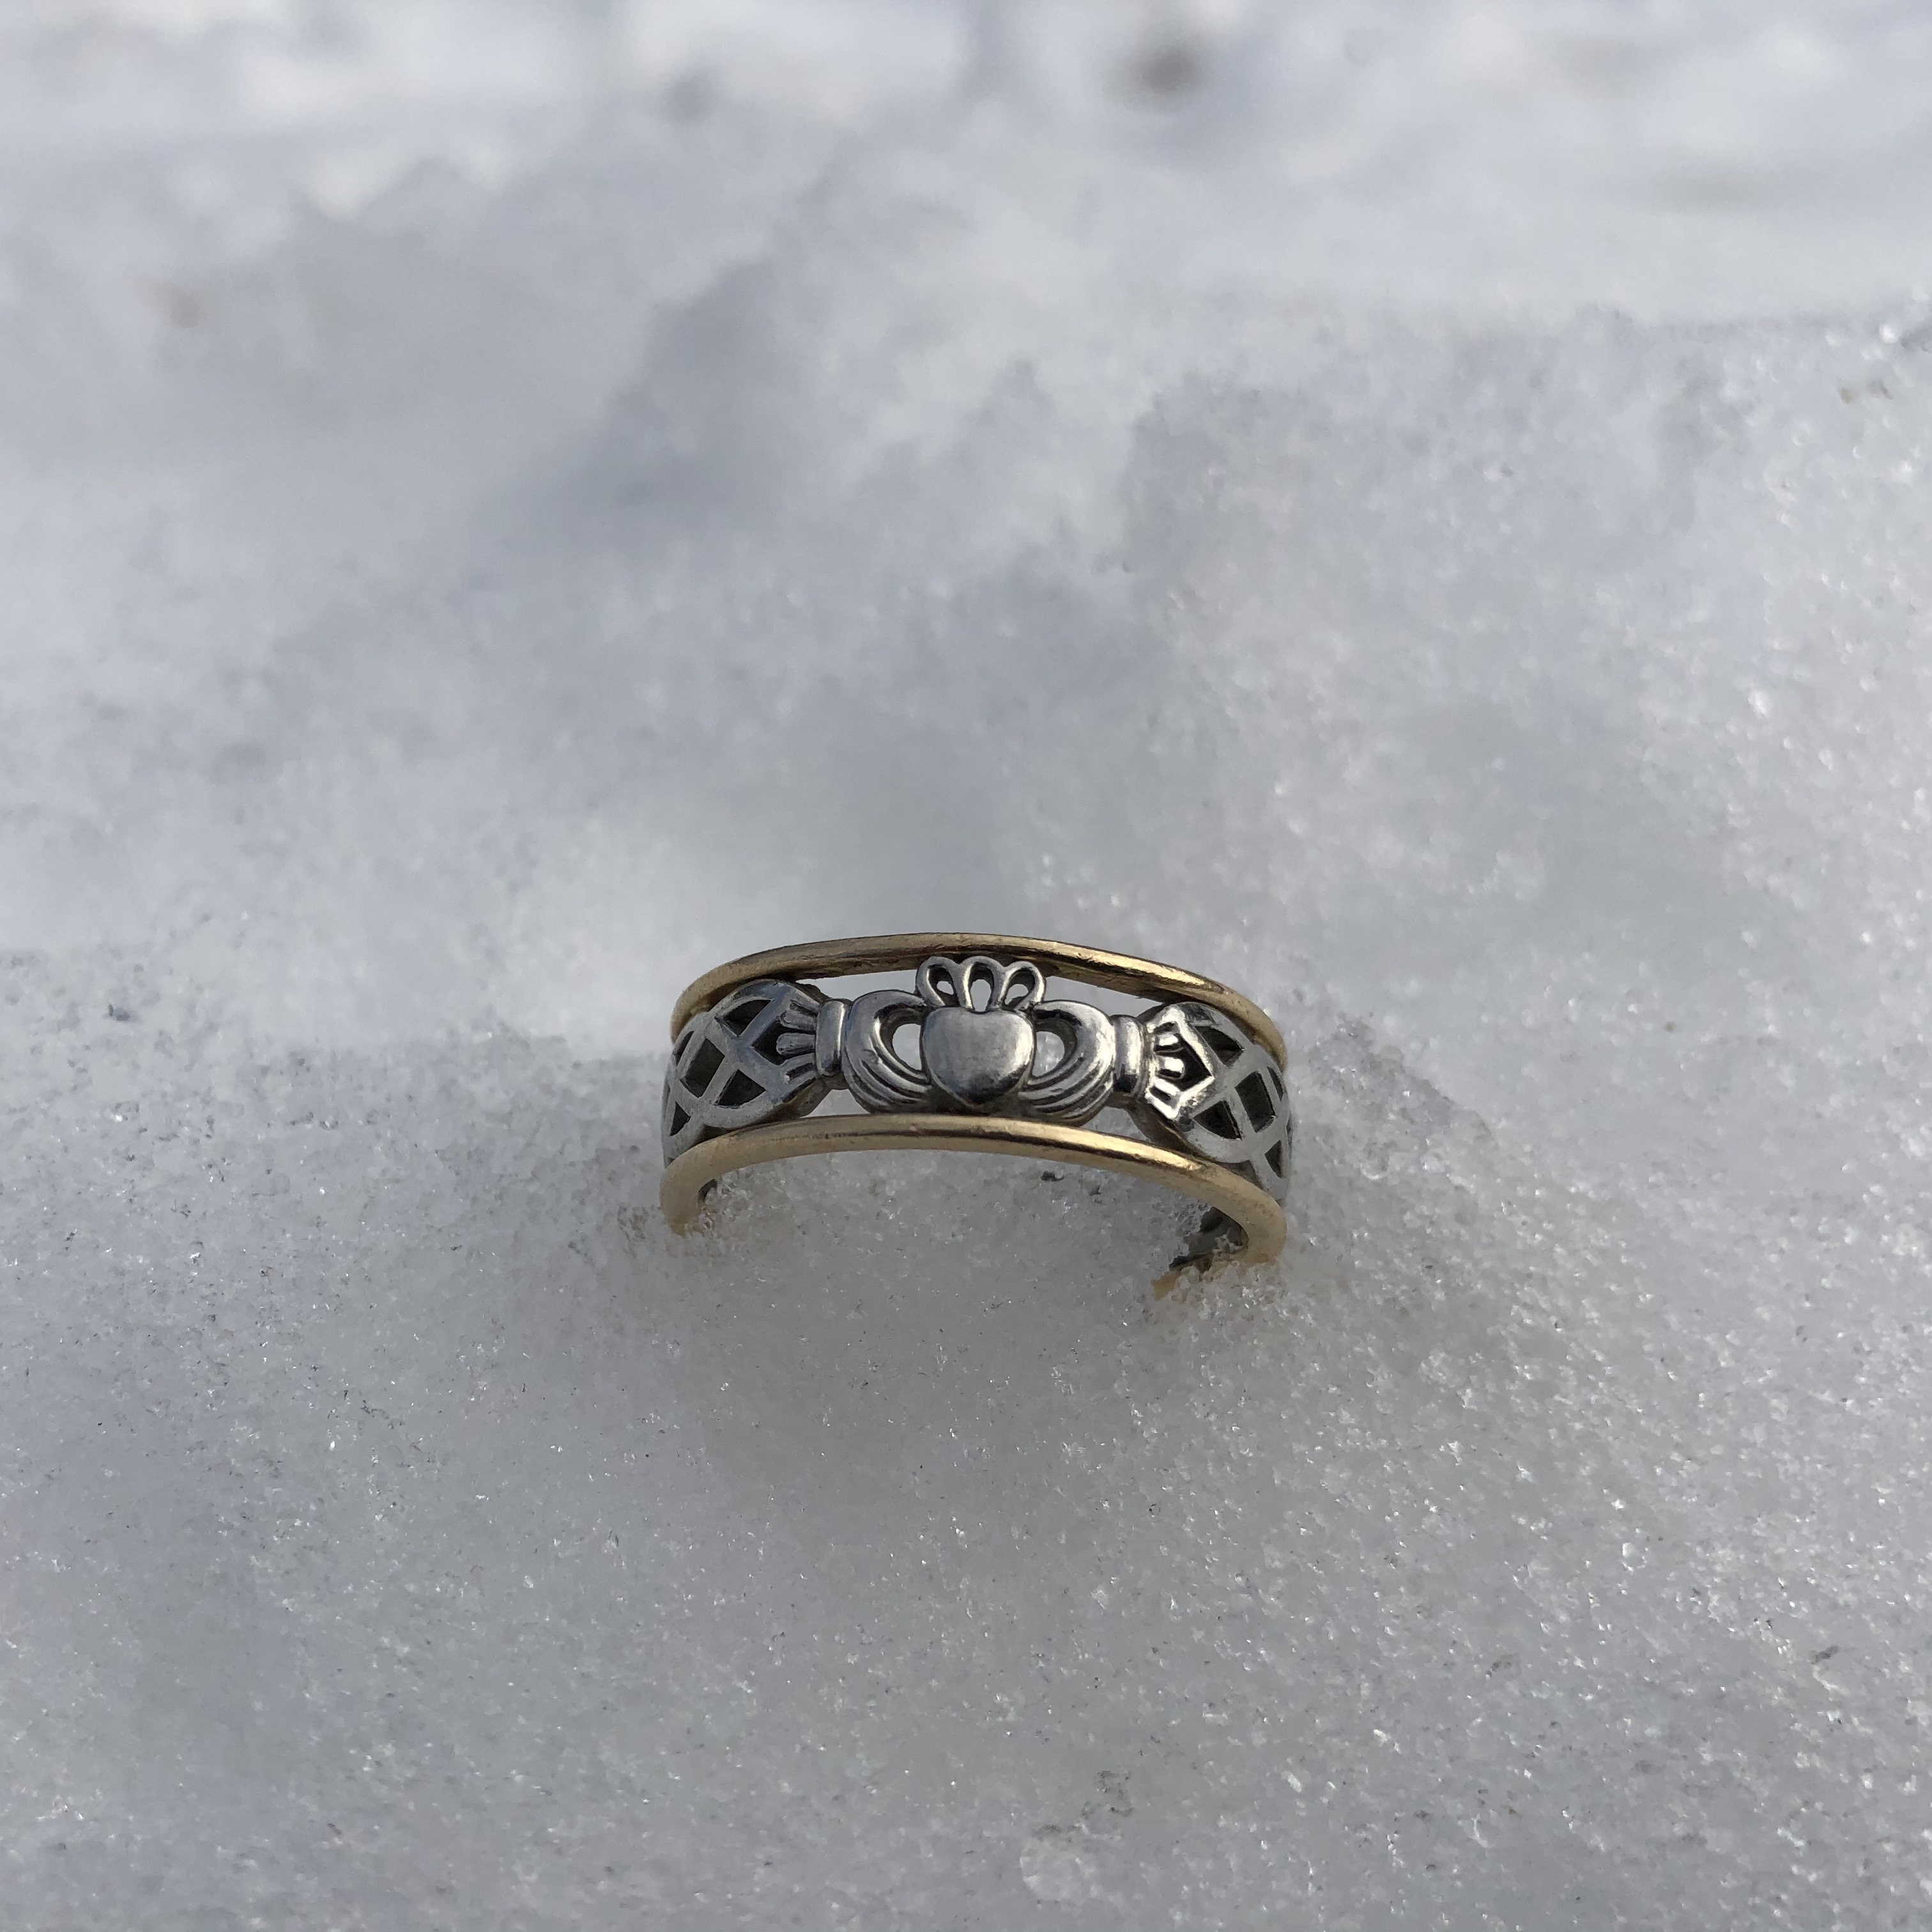 Lost ring while sleigh riding